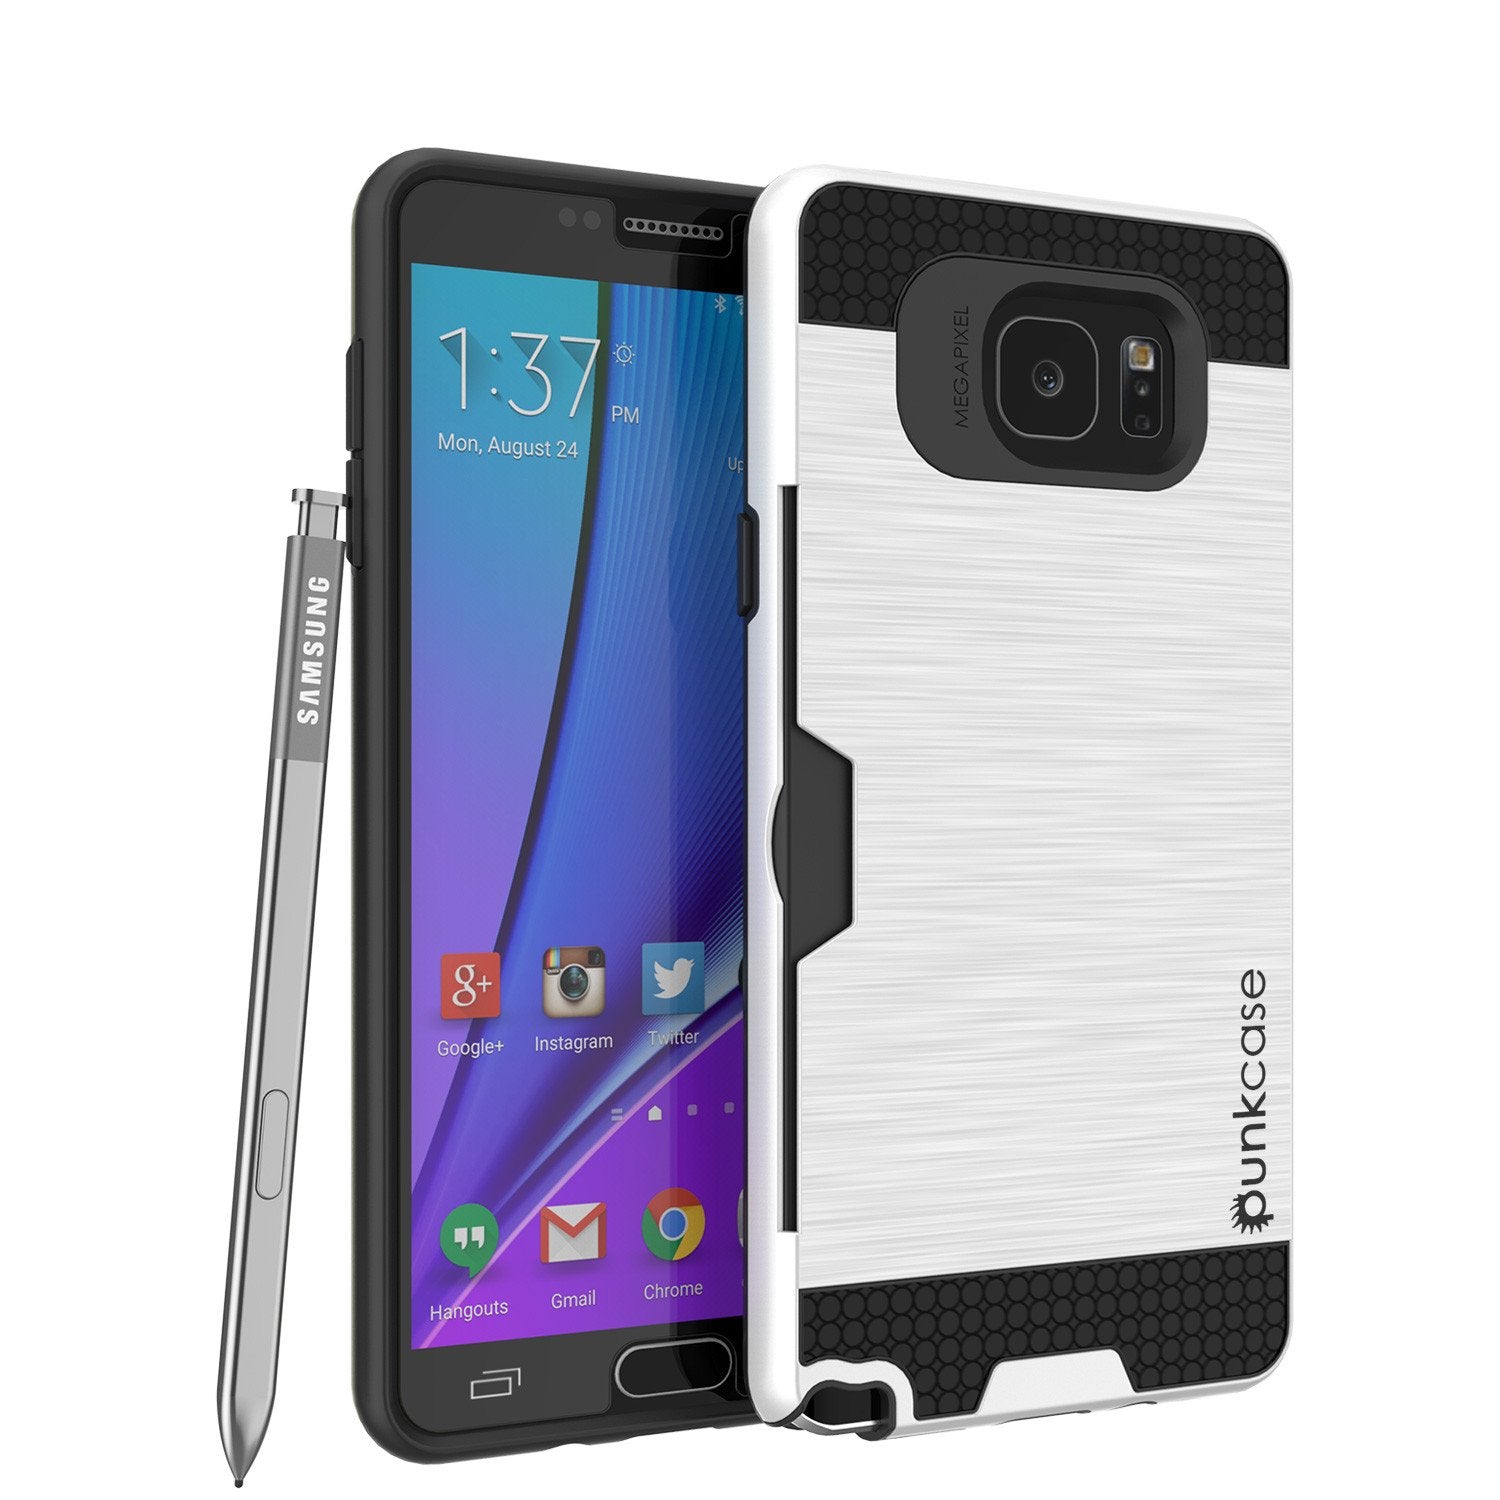 Galaxy Note 5 Case PunkCase SLOT White Series Slim Armor Soft Cover Case w/ Tempered Glass - PunkCase NZ